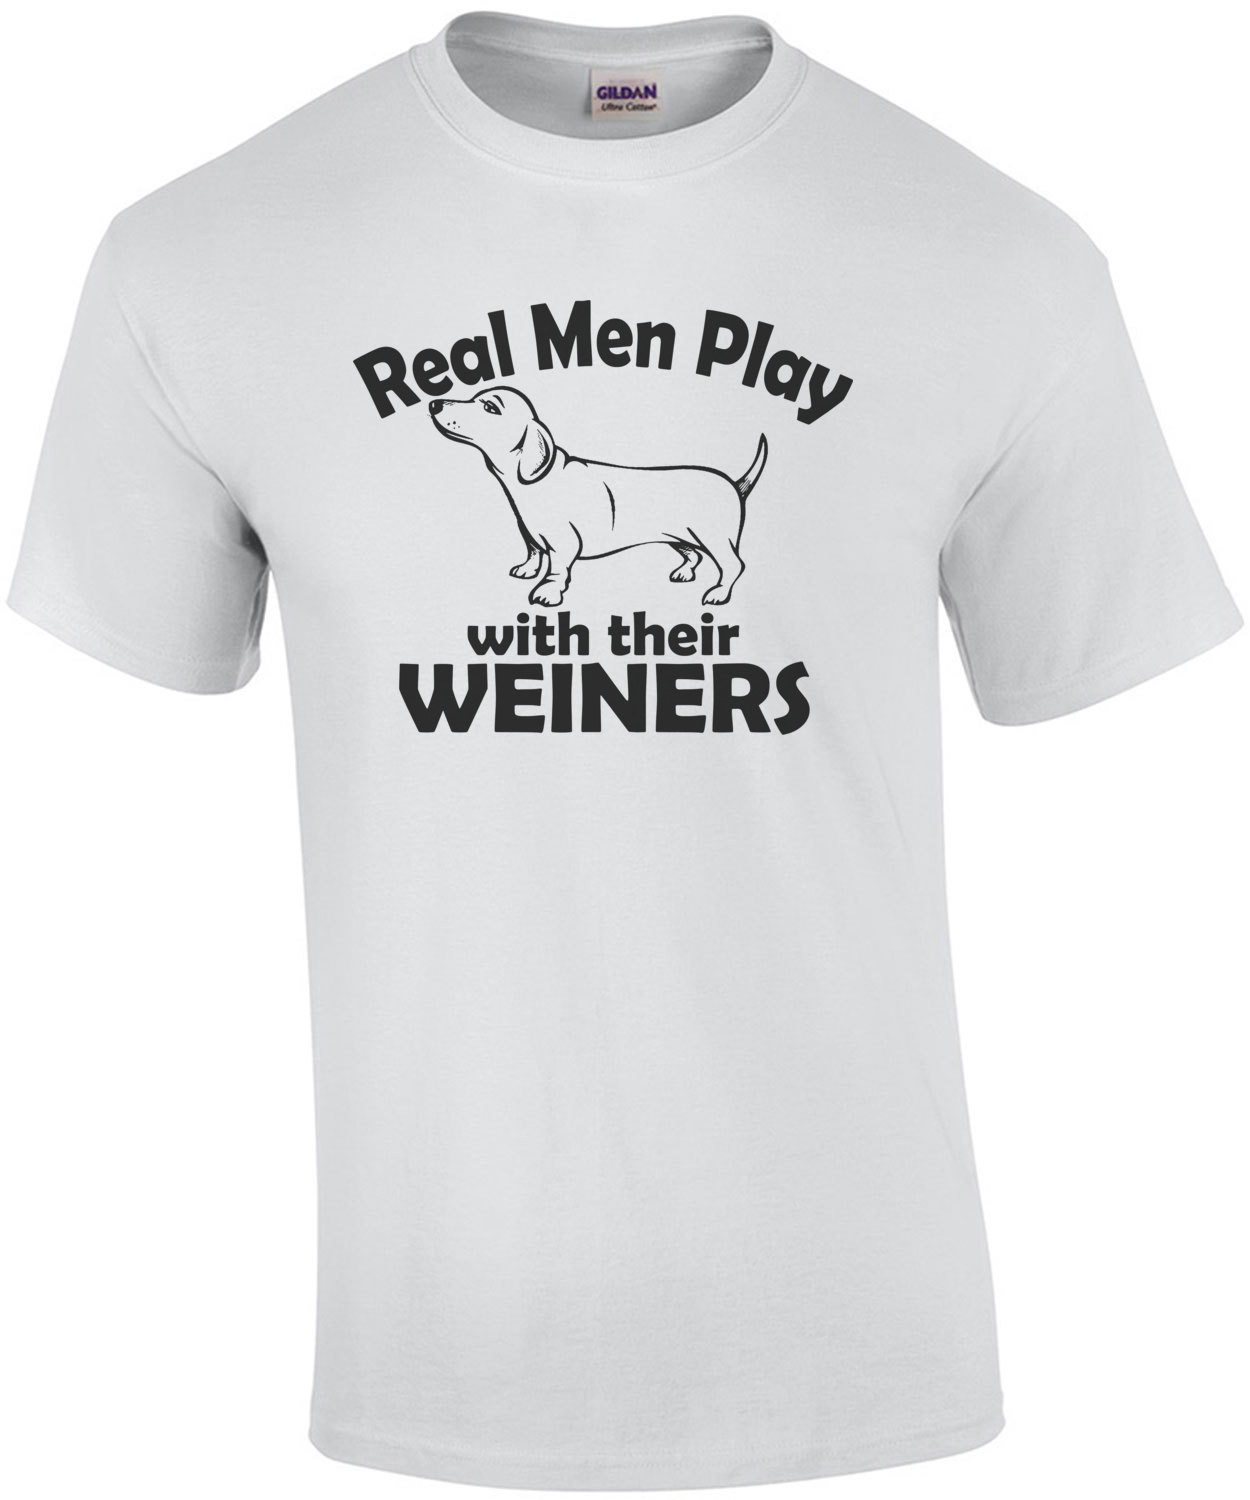 Real Men Play With Their Weiners T-Shirt